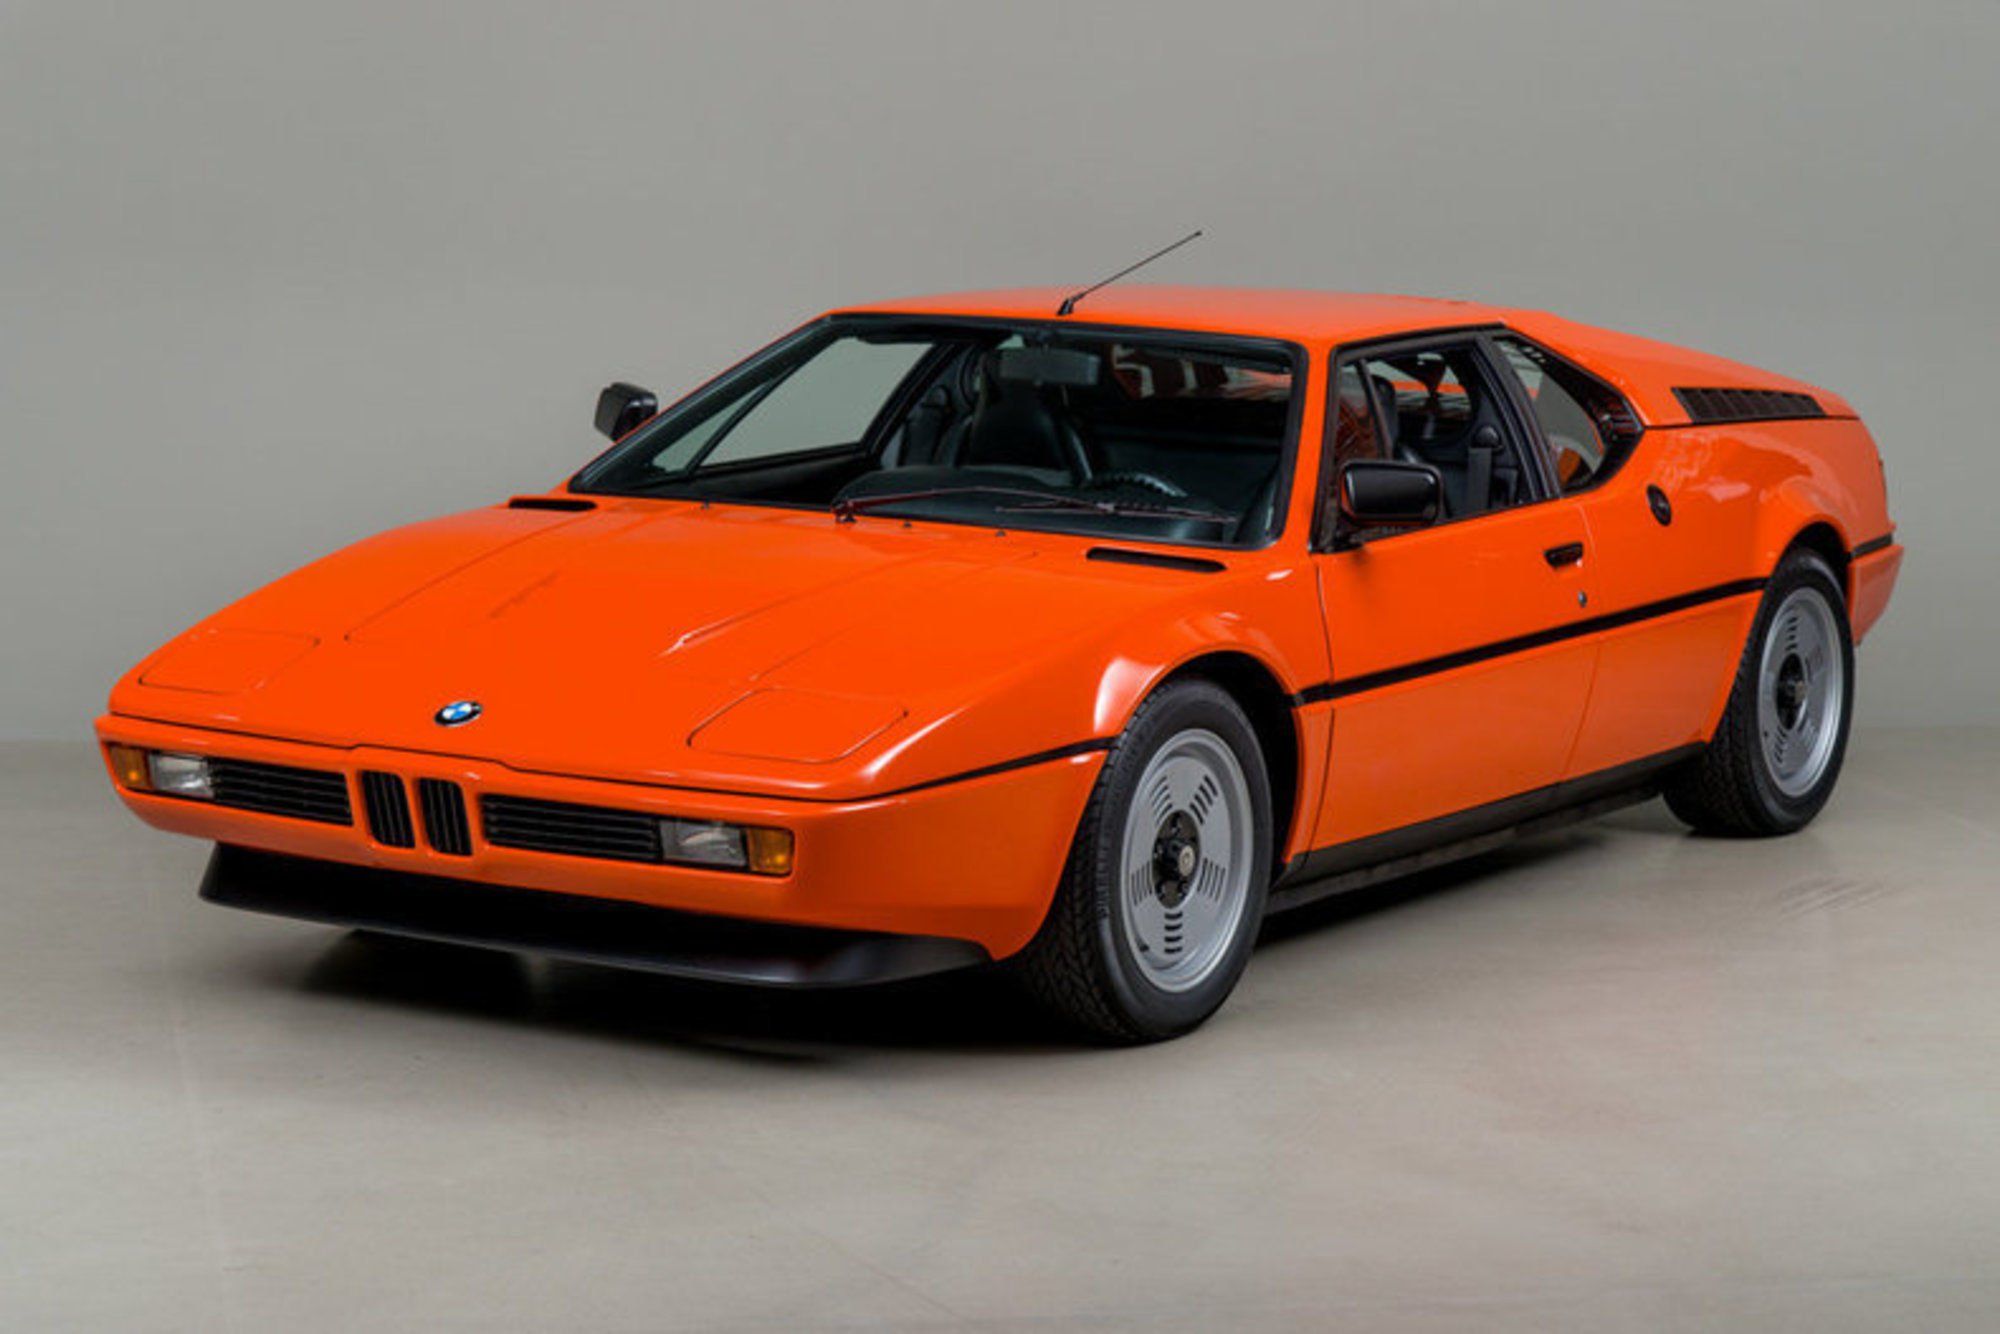 2019 This Very Orange 1980 BMW M1 Is Up For Sale For $745K